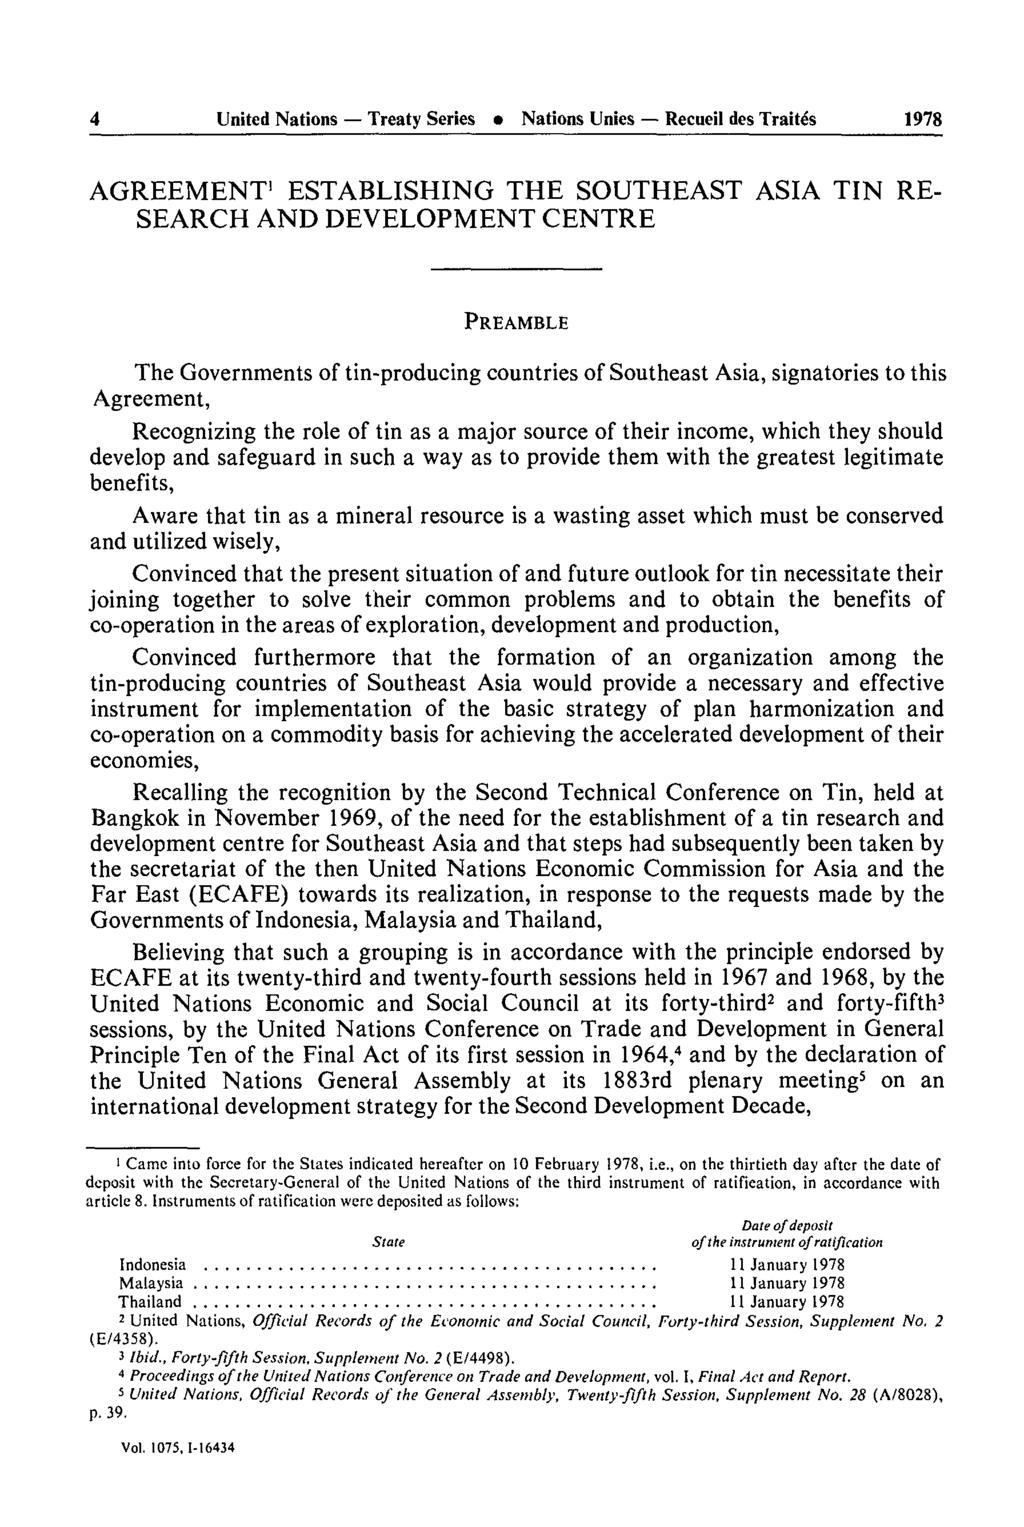 4 United Nations Treaty Series Nations Unies Recueil des Traités 1978 AGREEMENT 1 ESTABLISHING THE SOUTHEAST ASIA TIN RE SEARCH AND DEVELOPMENT CENTRE PREAMBLE The Governments of tin-producing